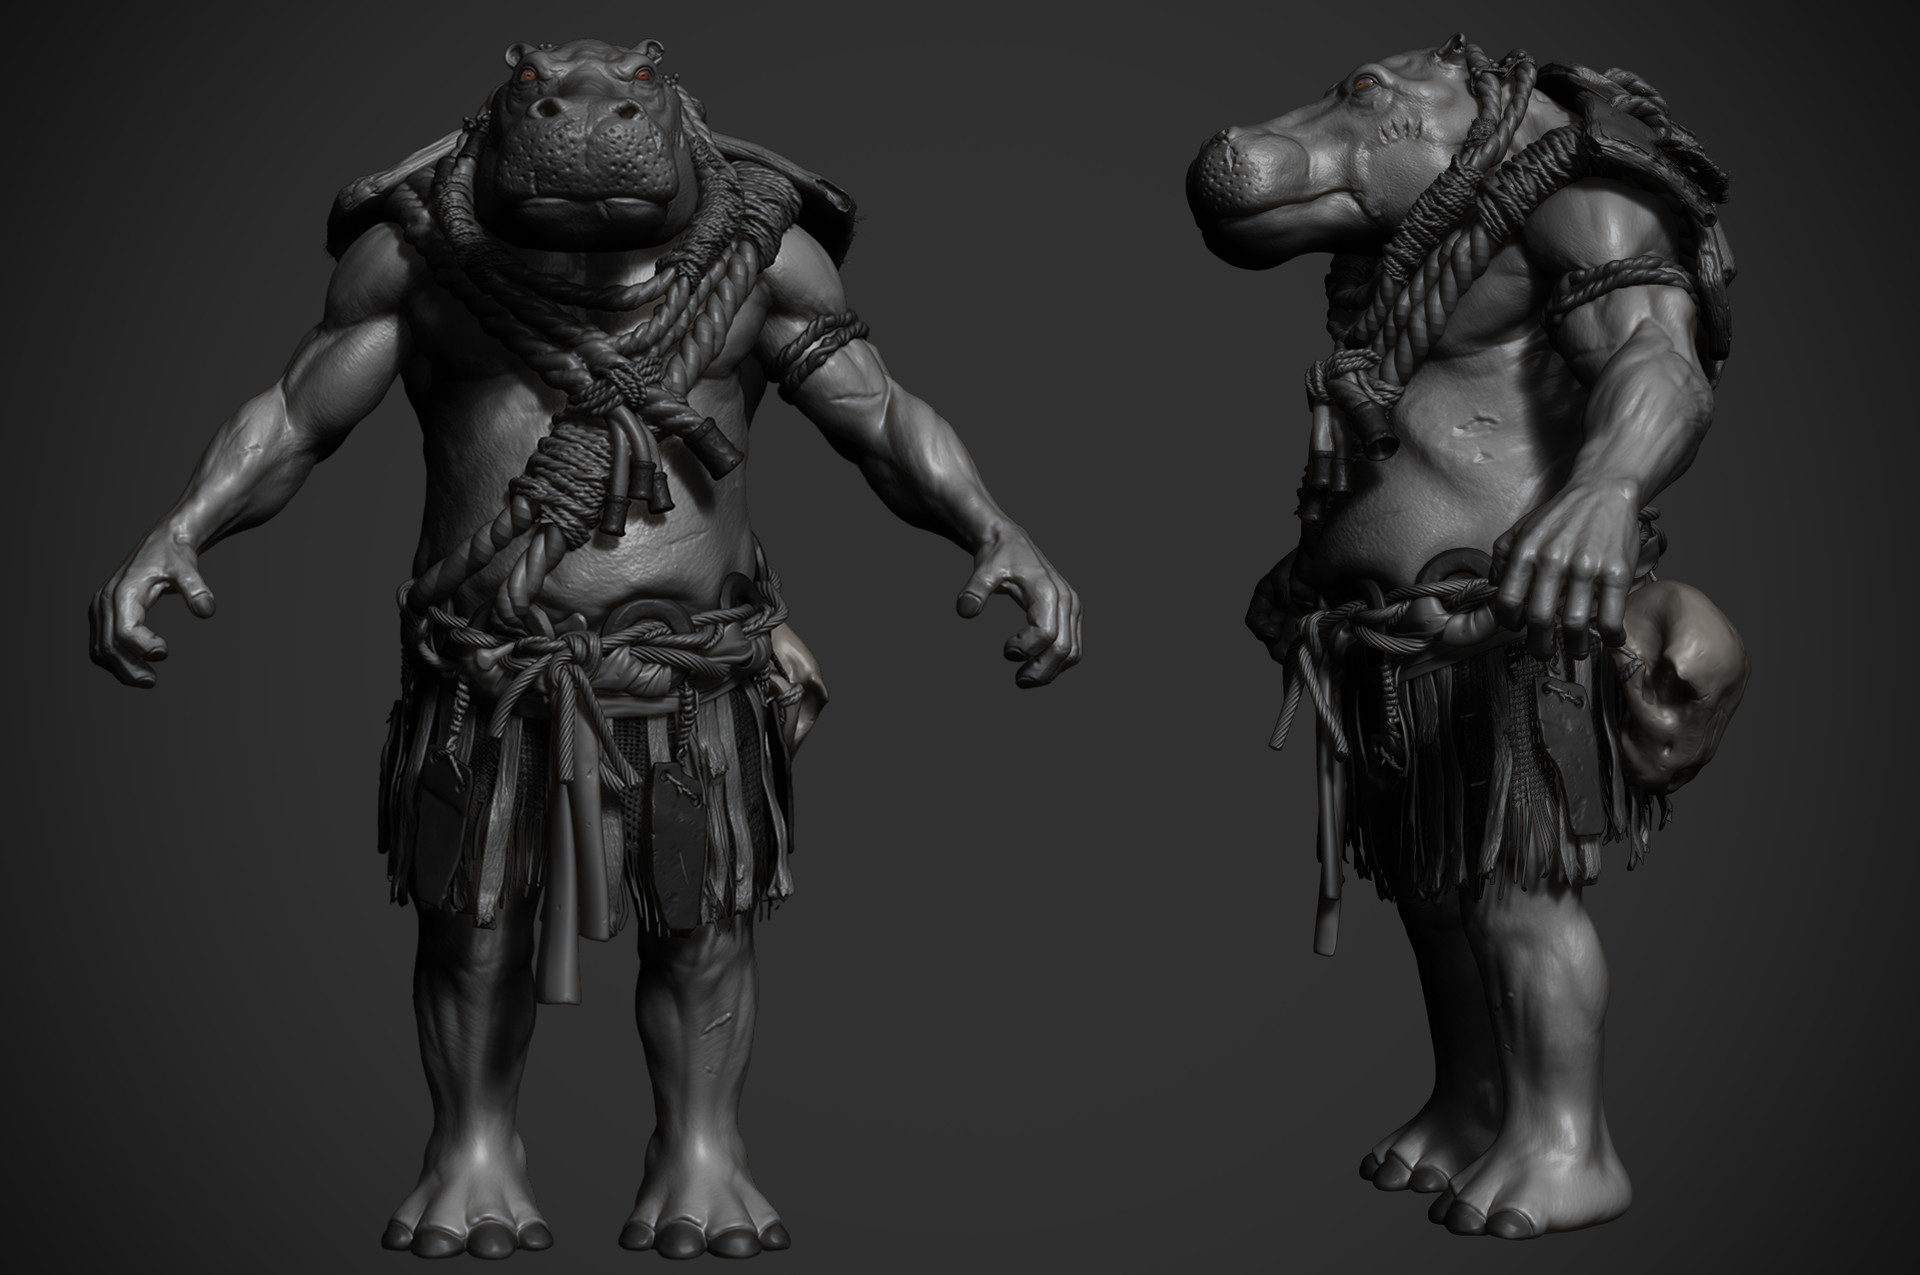 omar-chaouch-hippo-animal-warrior-omar-chaouch-wip-02.jpg